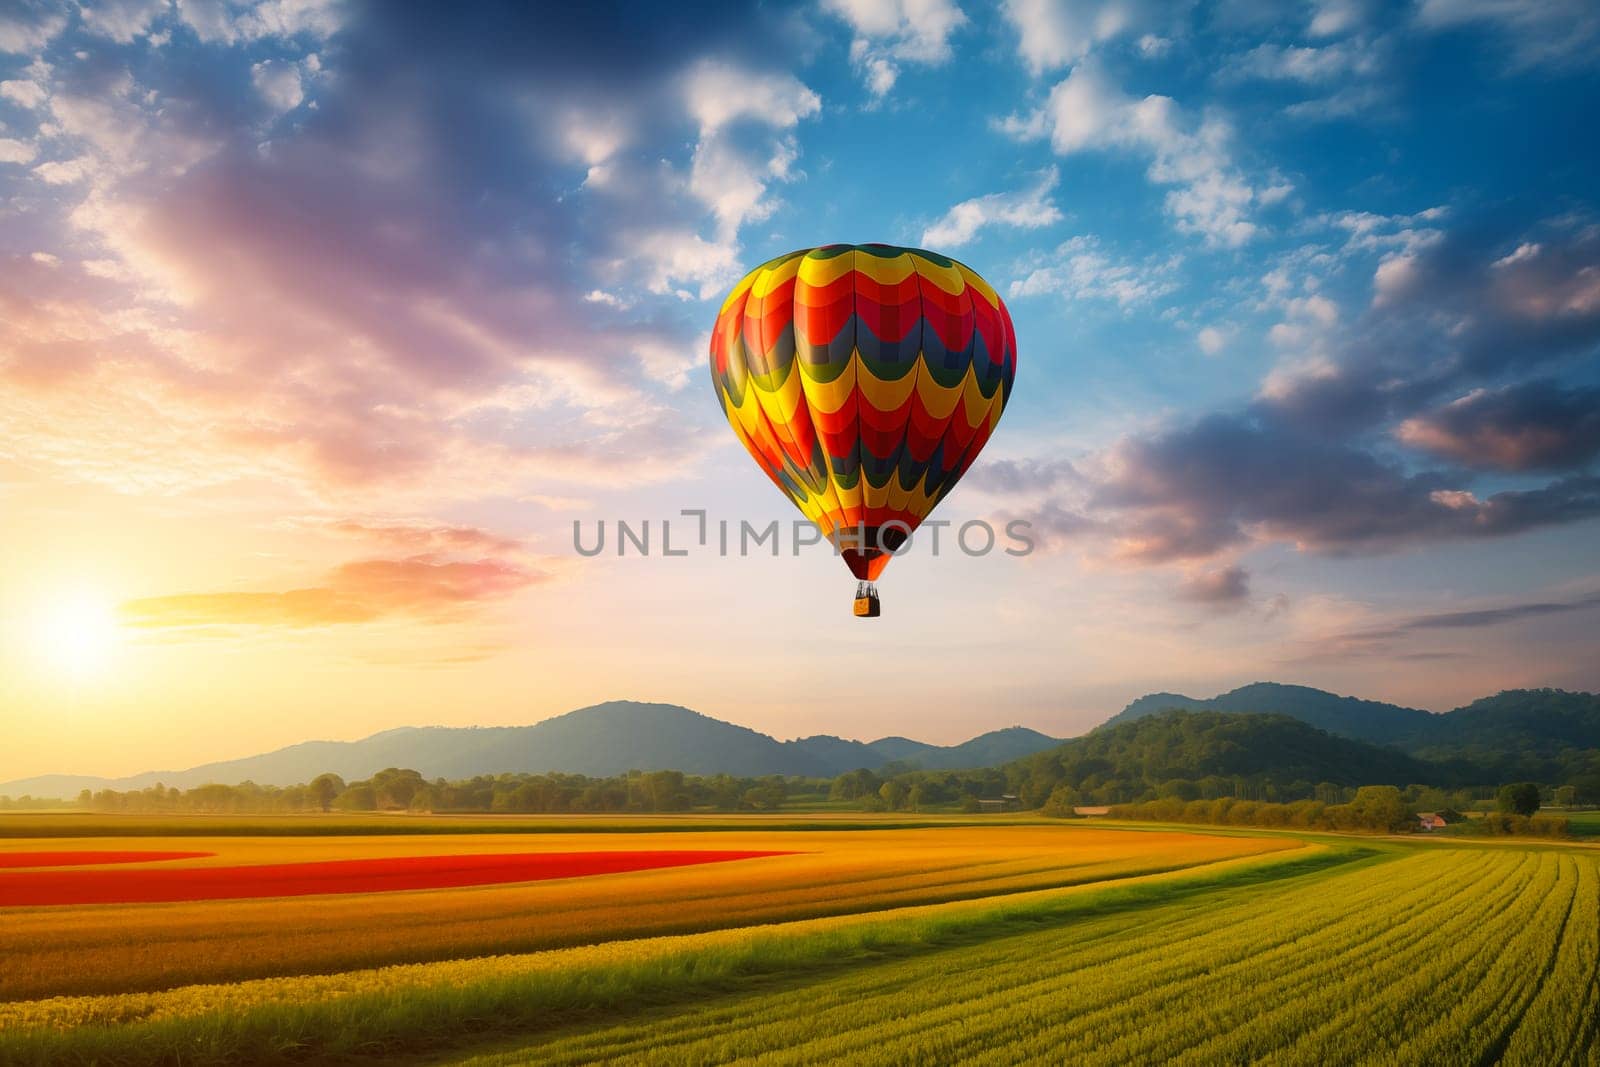 A colorful hot air balloon floats in sky over a blooming field meadow of flowers landscape at sunset with orange and blue skies in the background. Travel journey adventure beauty of nature concept